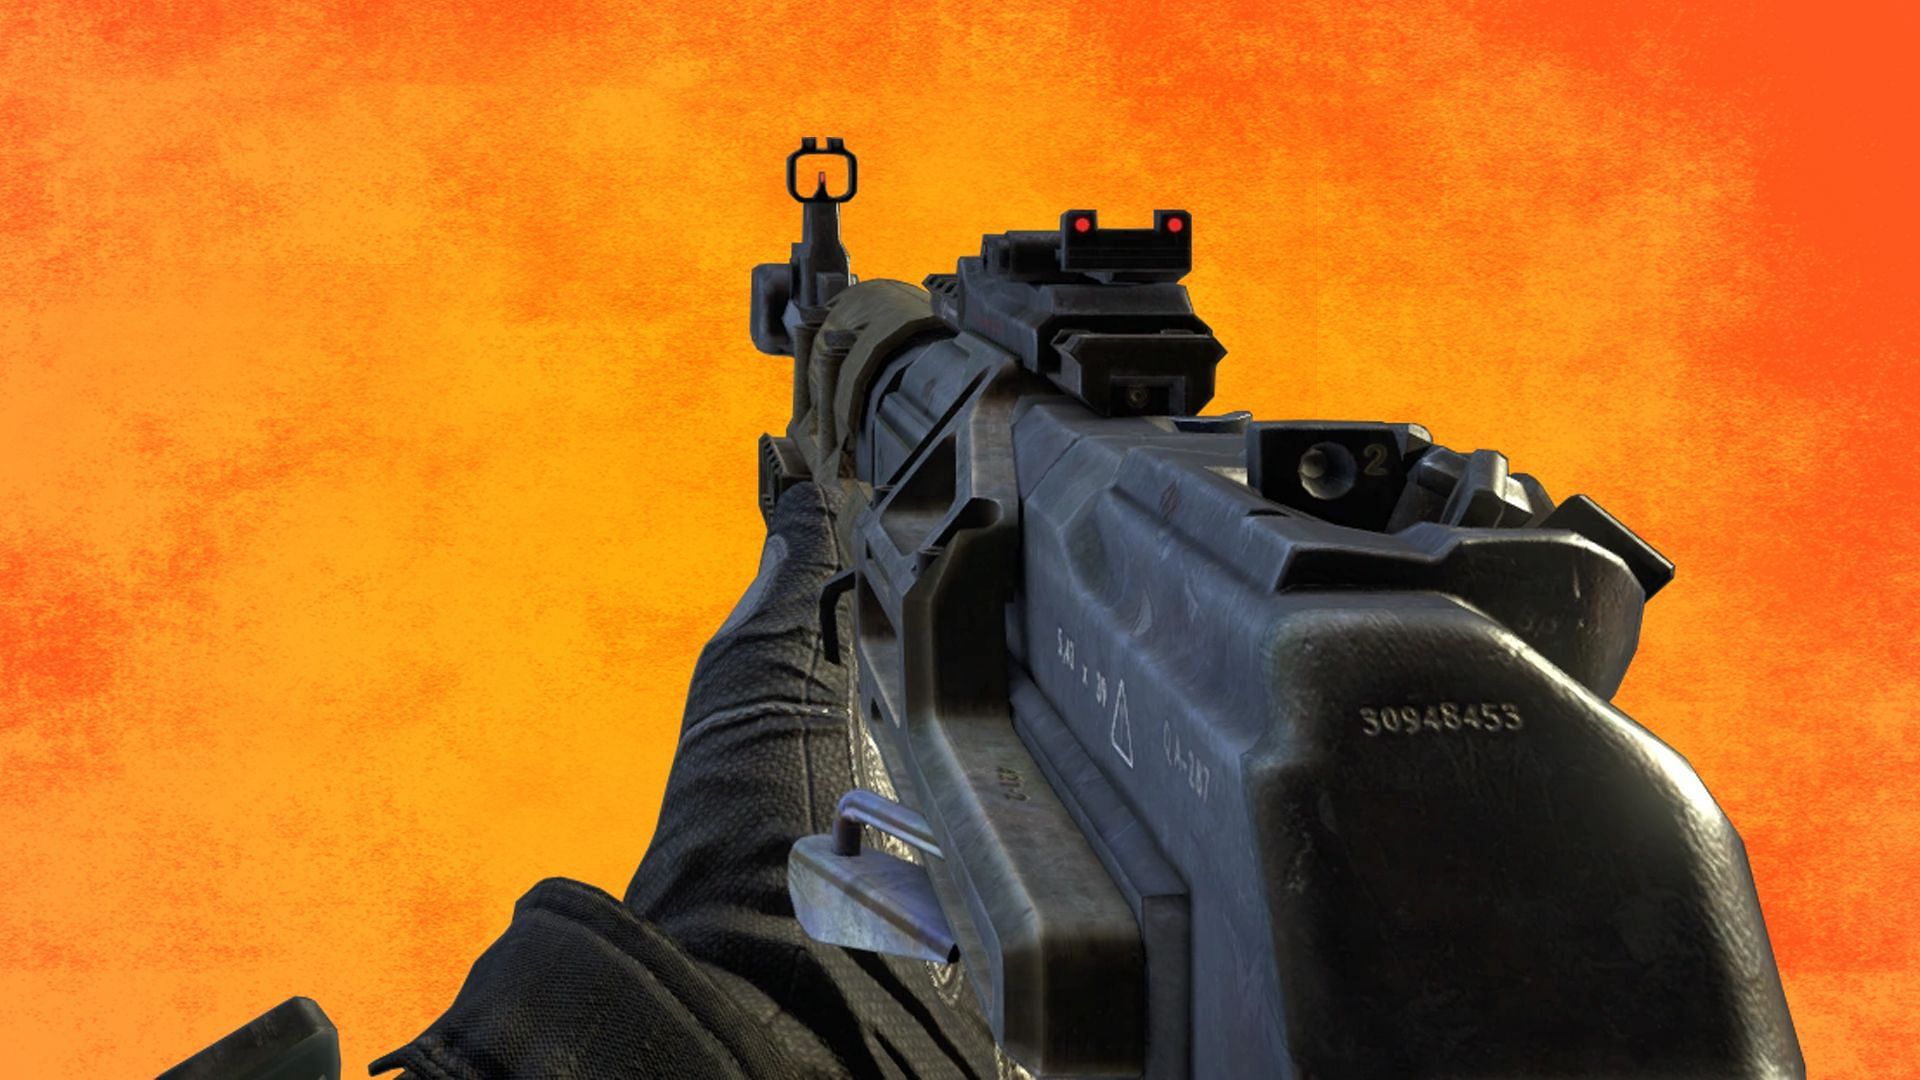 AN-94 in Black Ops 2 (Image via Activision)